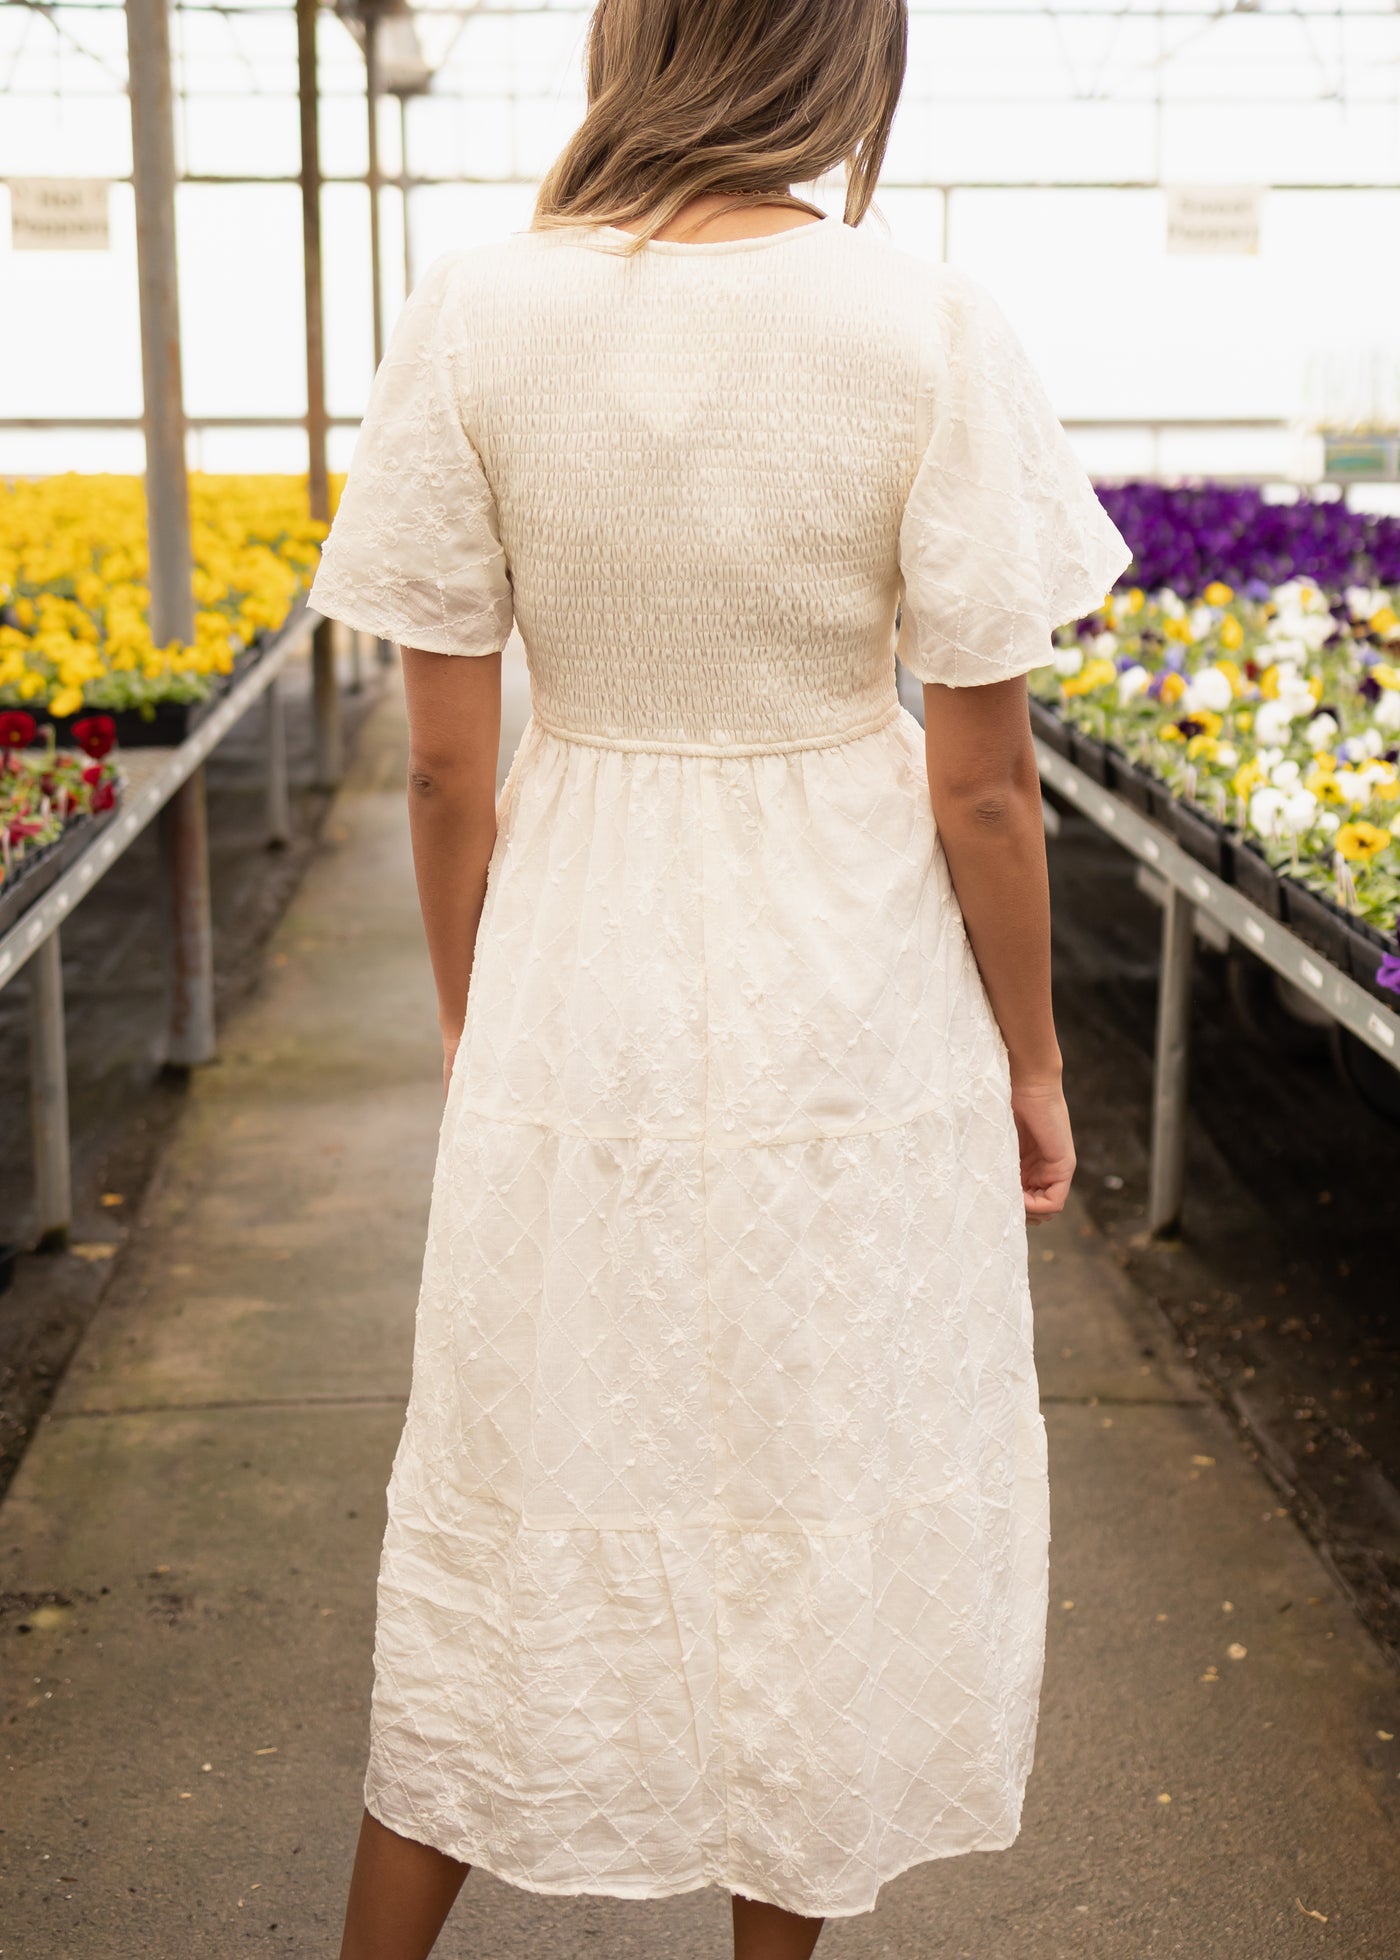 Back view of a short sleeve cream dress